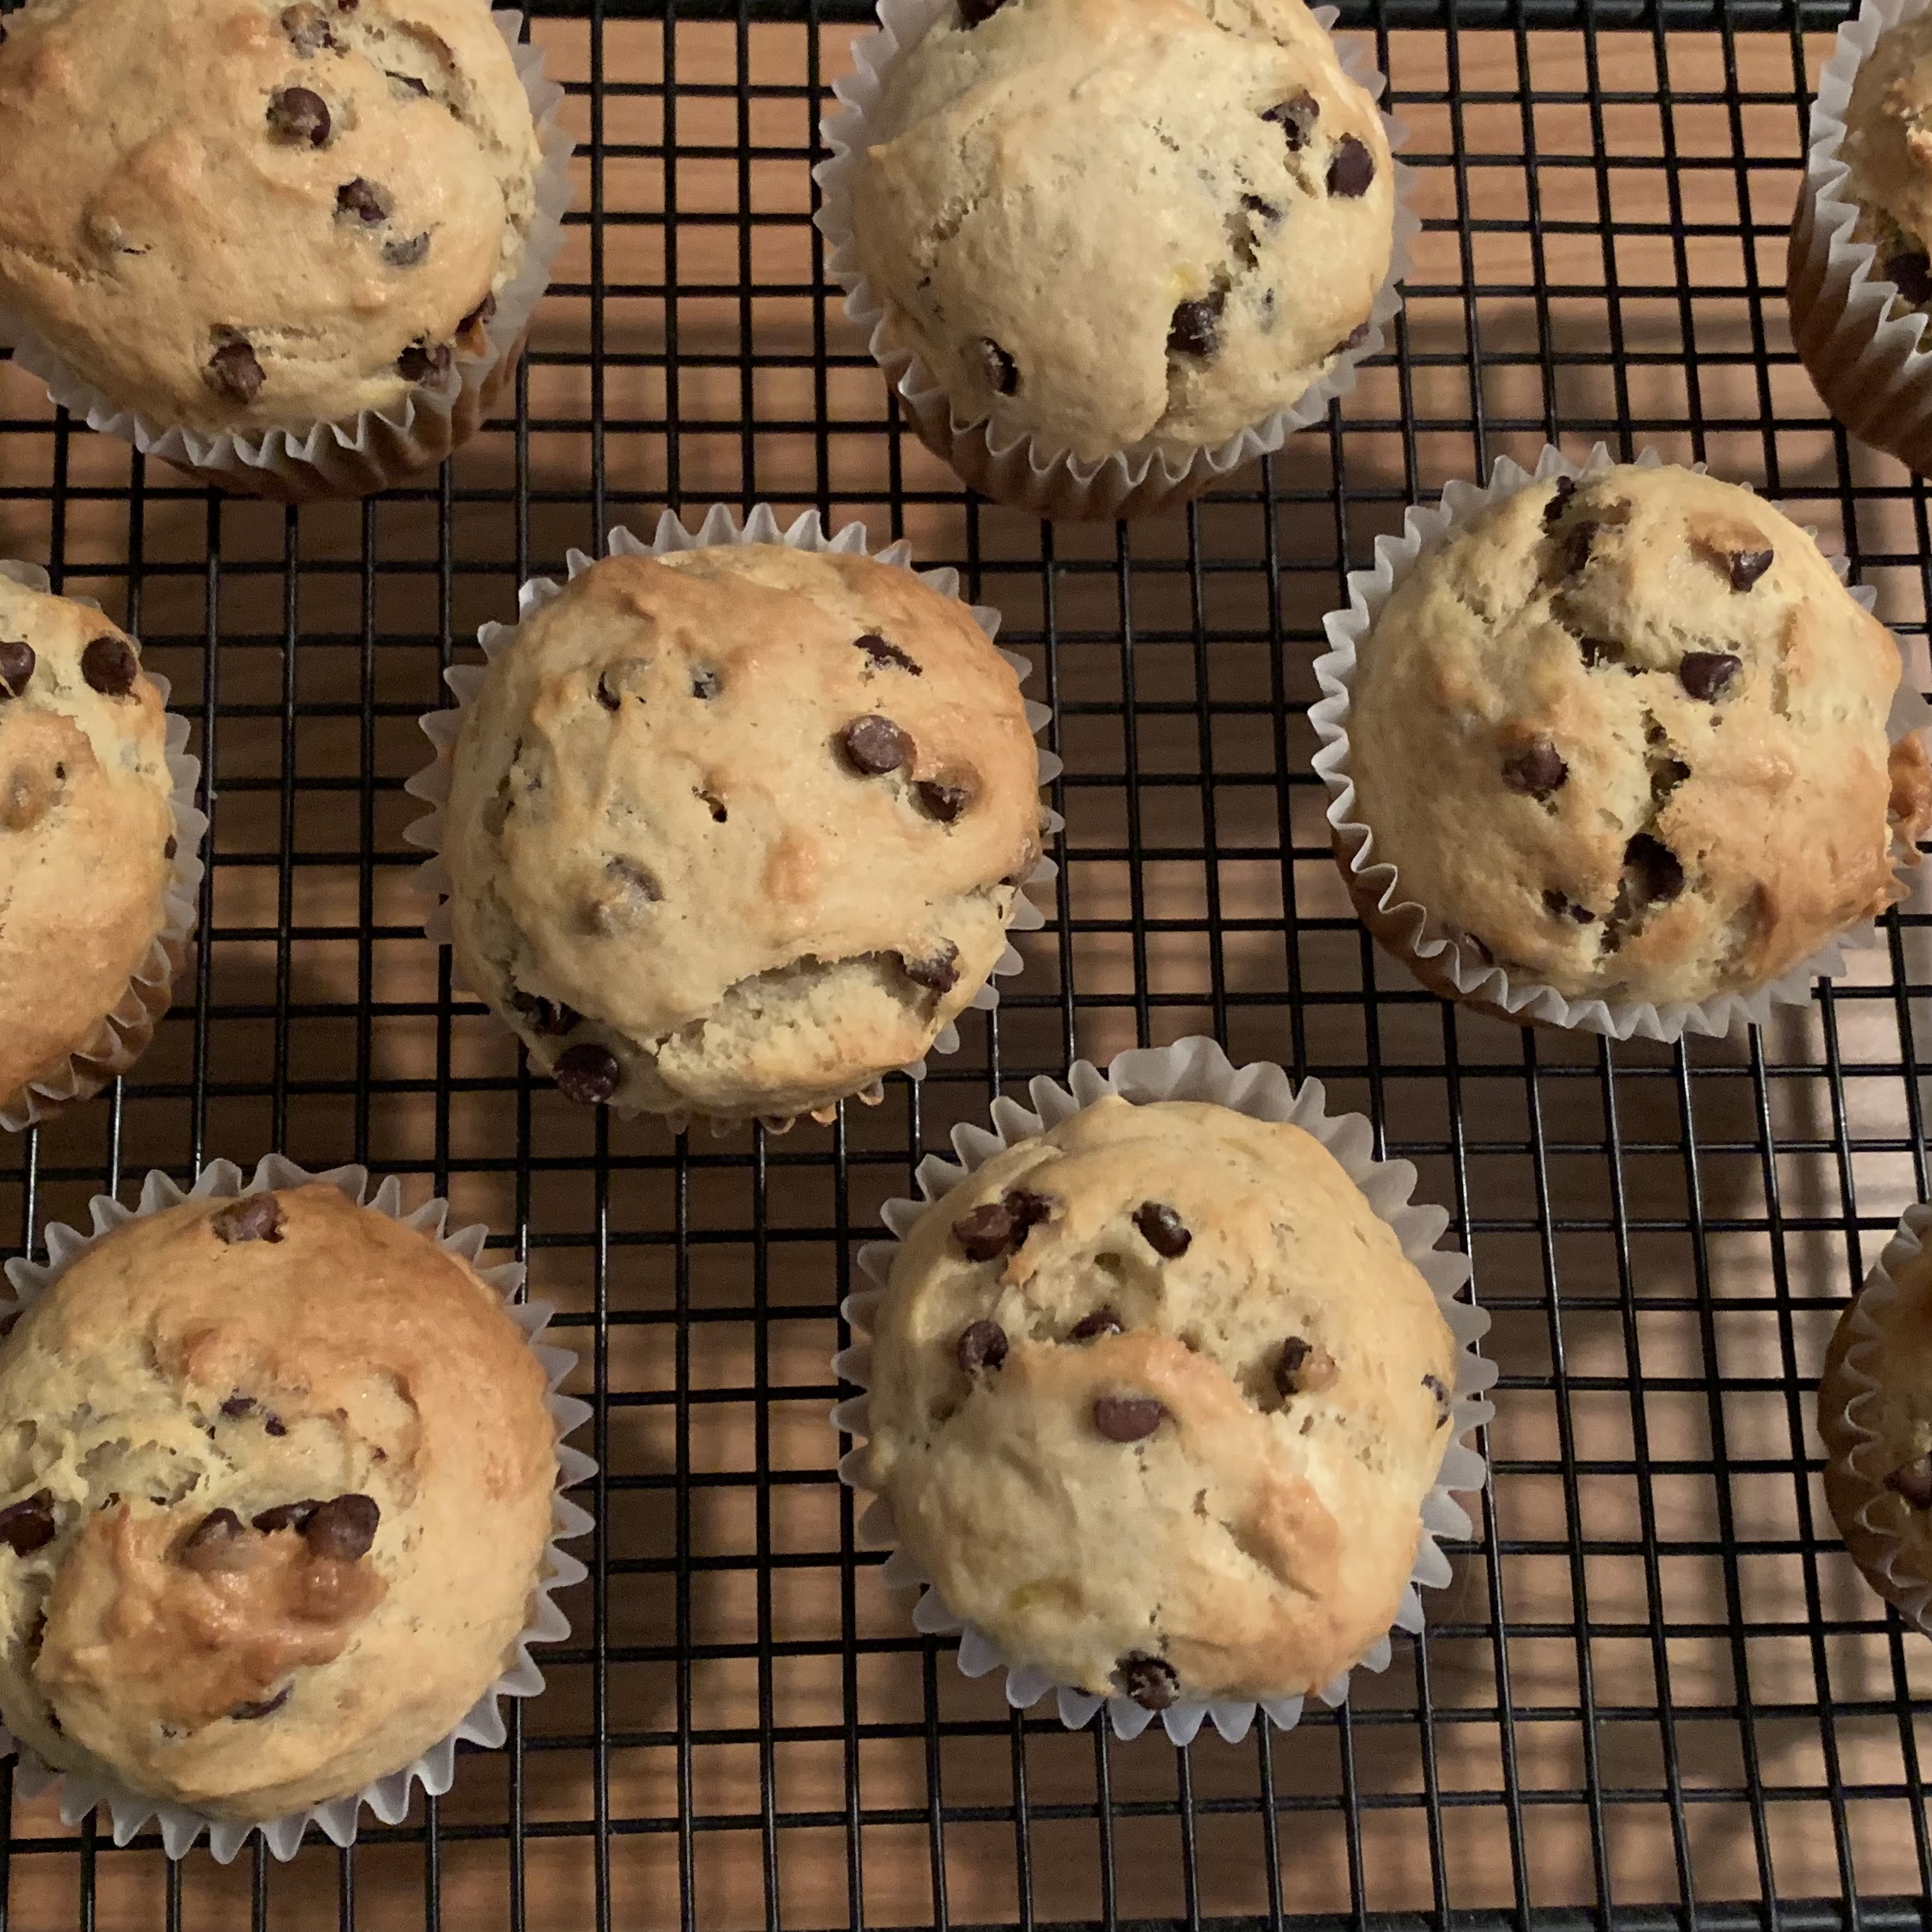 Most Requested Banana Chocolate Chip Muffins 